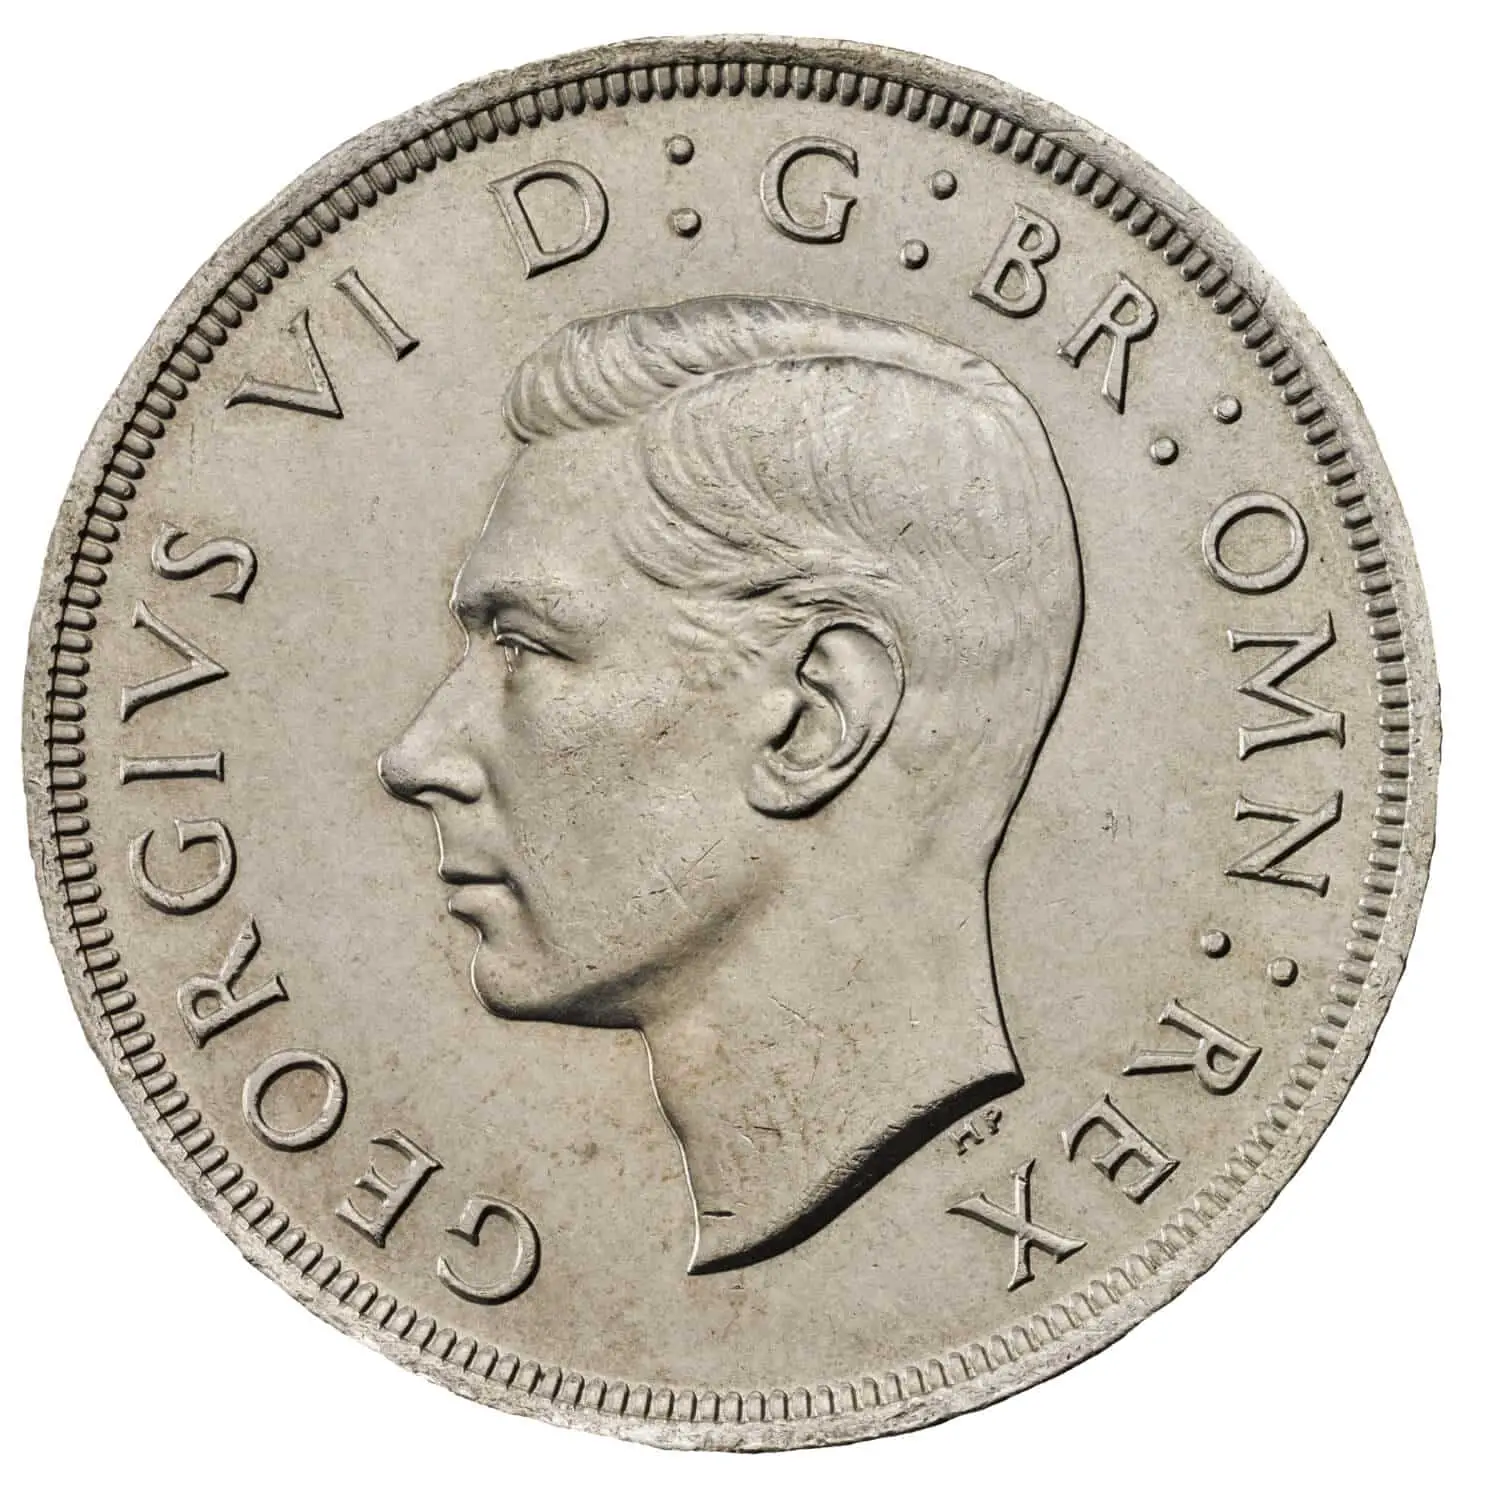 The 1937 Crown Coin Obverse